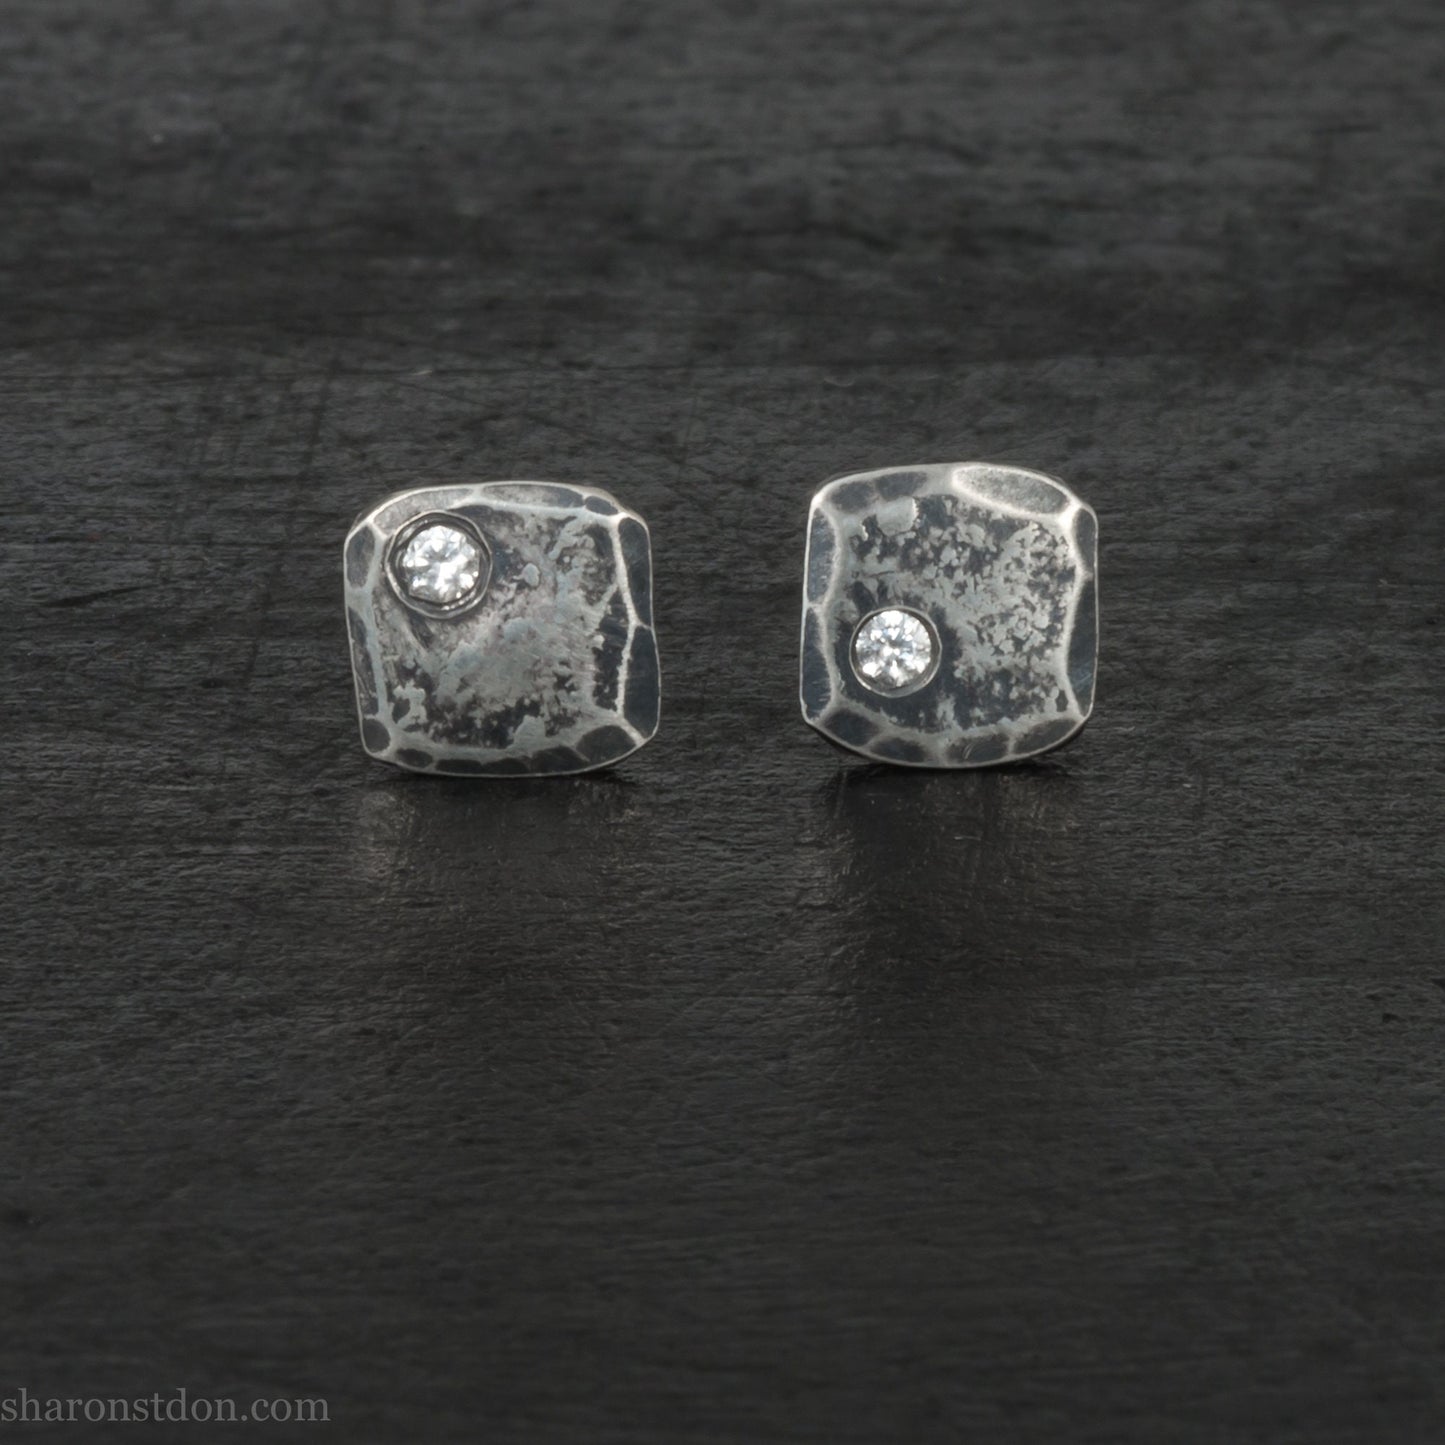 Canadian diamond handmade stud earrings for men or women | Certified Candamark diamonds and 925 sterling silver, antiqued dark texture